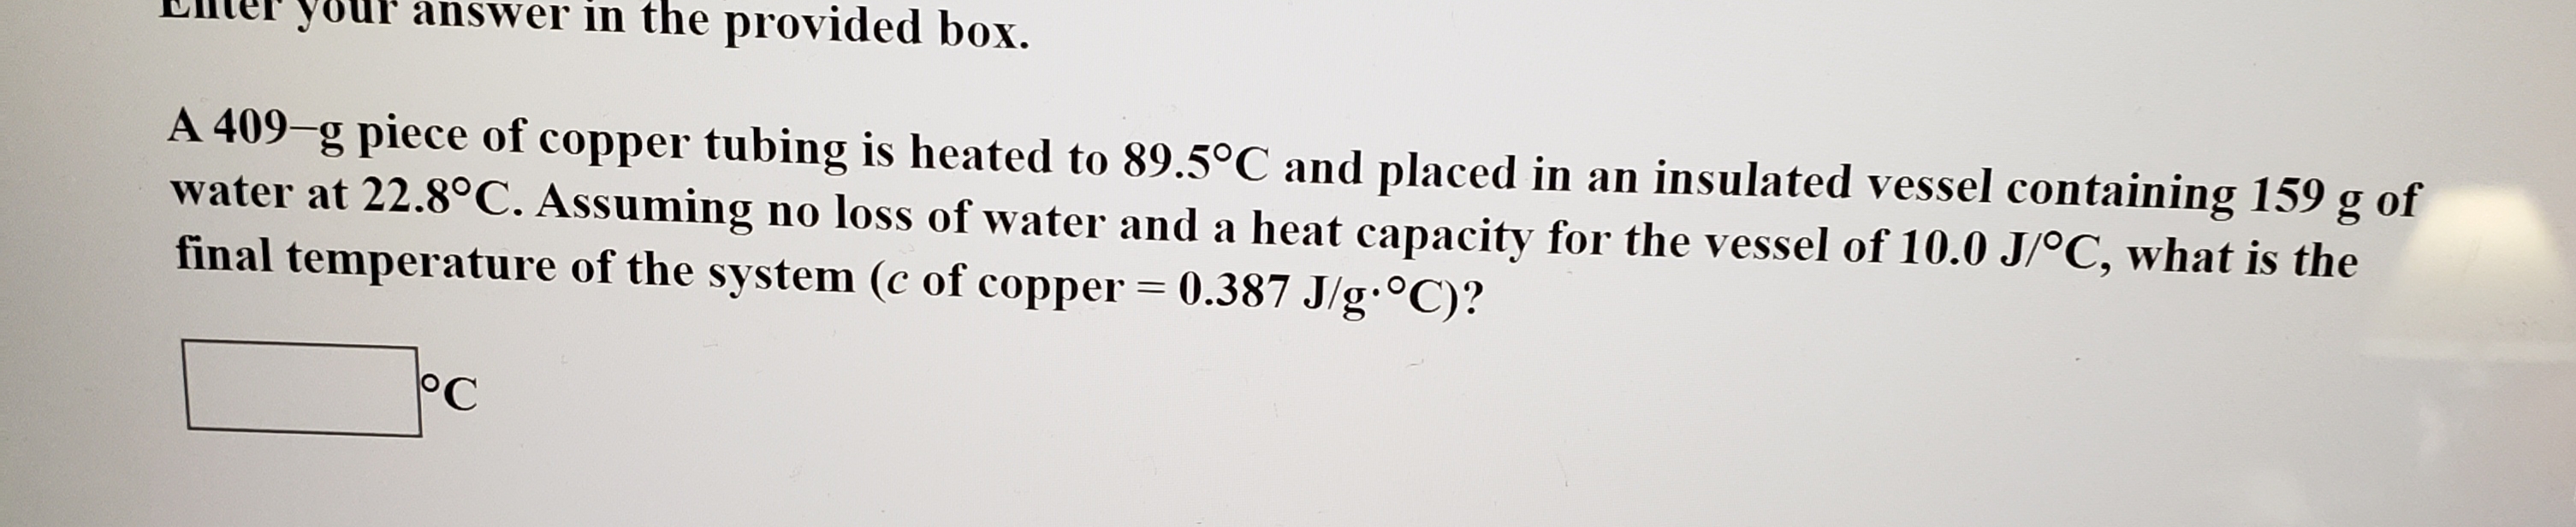 your answer in the provided box.
A 409-g piece of copper tubing is heated to 89.5°C and placed in an insulated vessel containing 159
water at 22.8°C. Assuming no loss of water and a heat capacity for the vessel of 10.0 J/oC, what is the
final temperature of the system (c of copper 0.387 J/g.0C)?
g of
11
C
